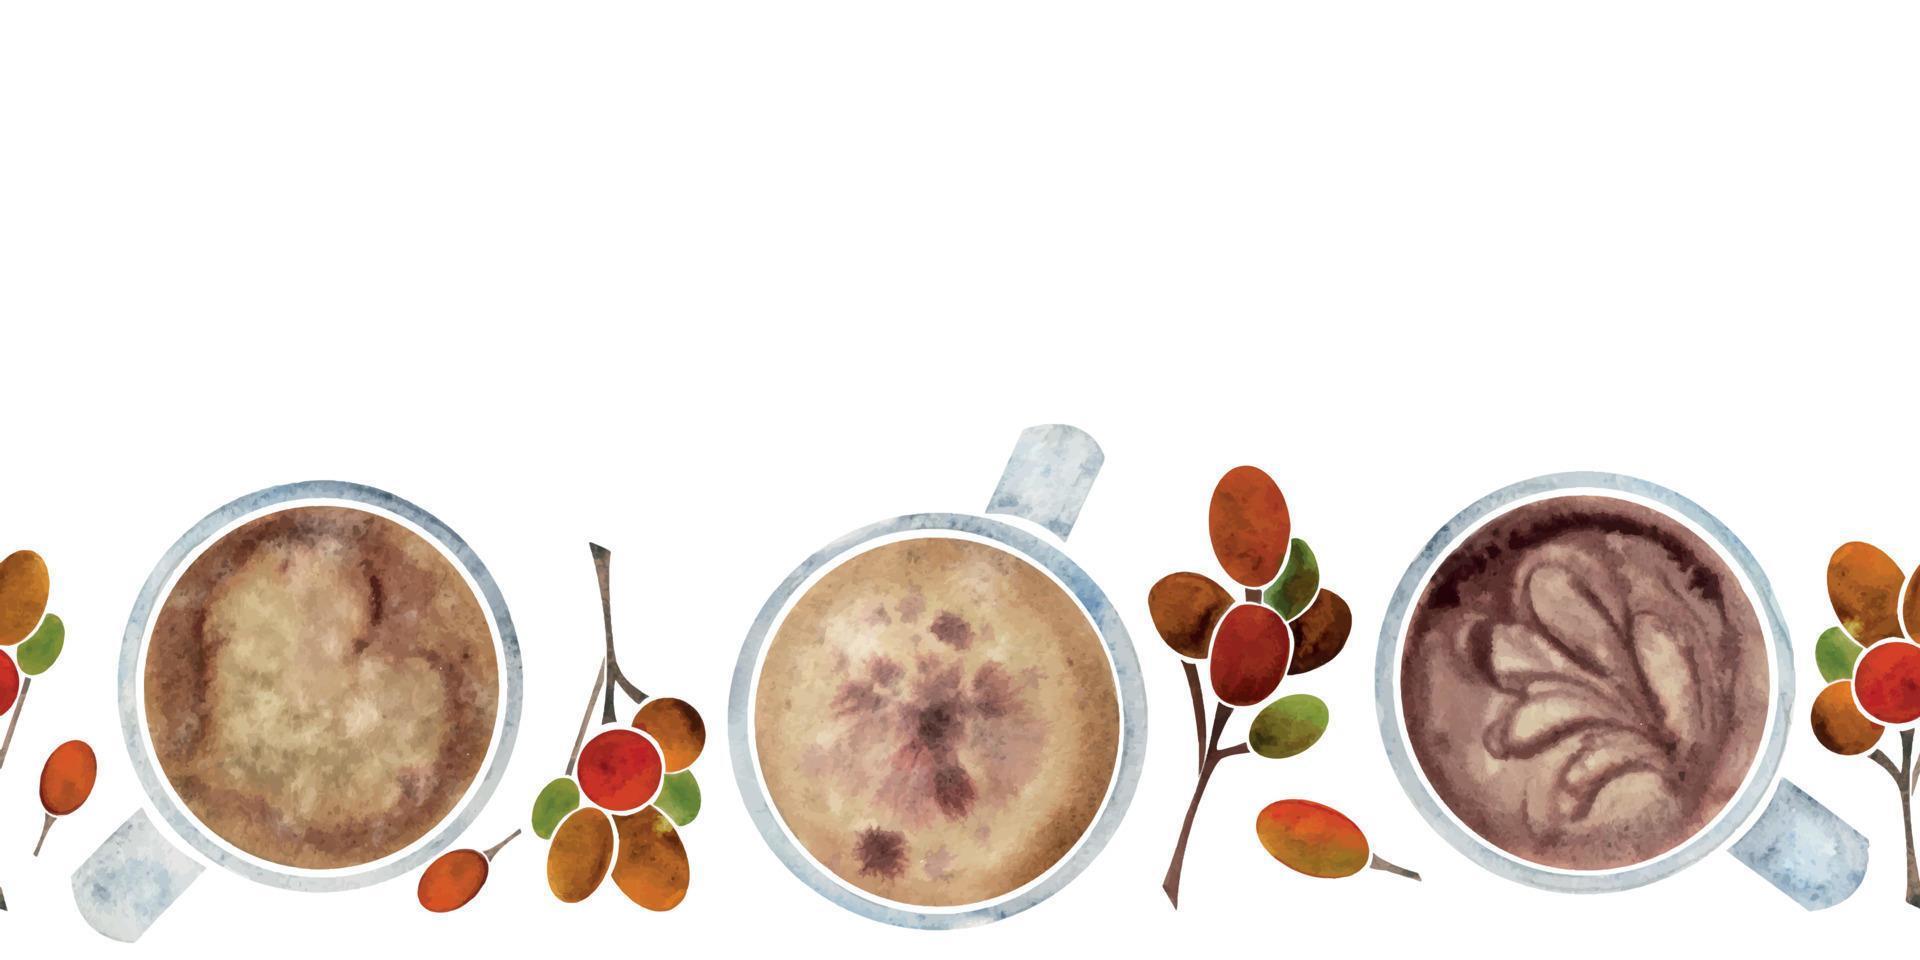 Watercolor hand drawn horizontal seamless banner with capuccino coffee cups, raw beans, top view. Isolated on white background. For invitations, cafe, restaurant food menu, print, website, cards vector